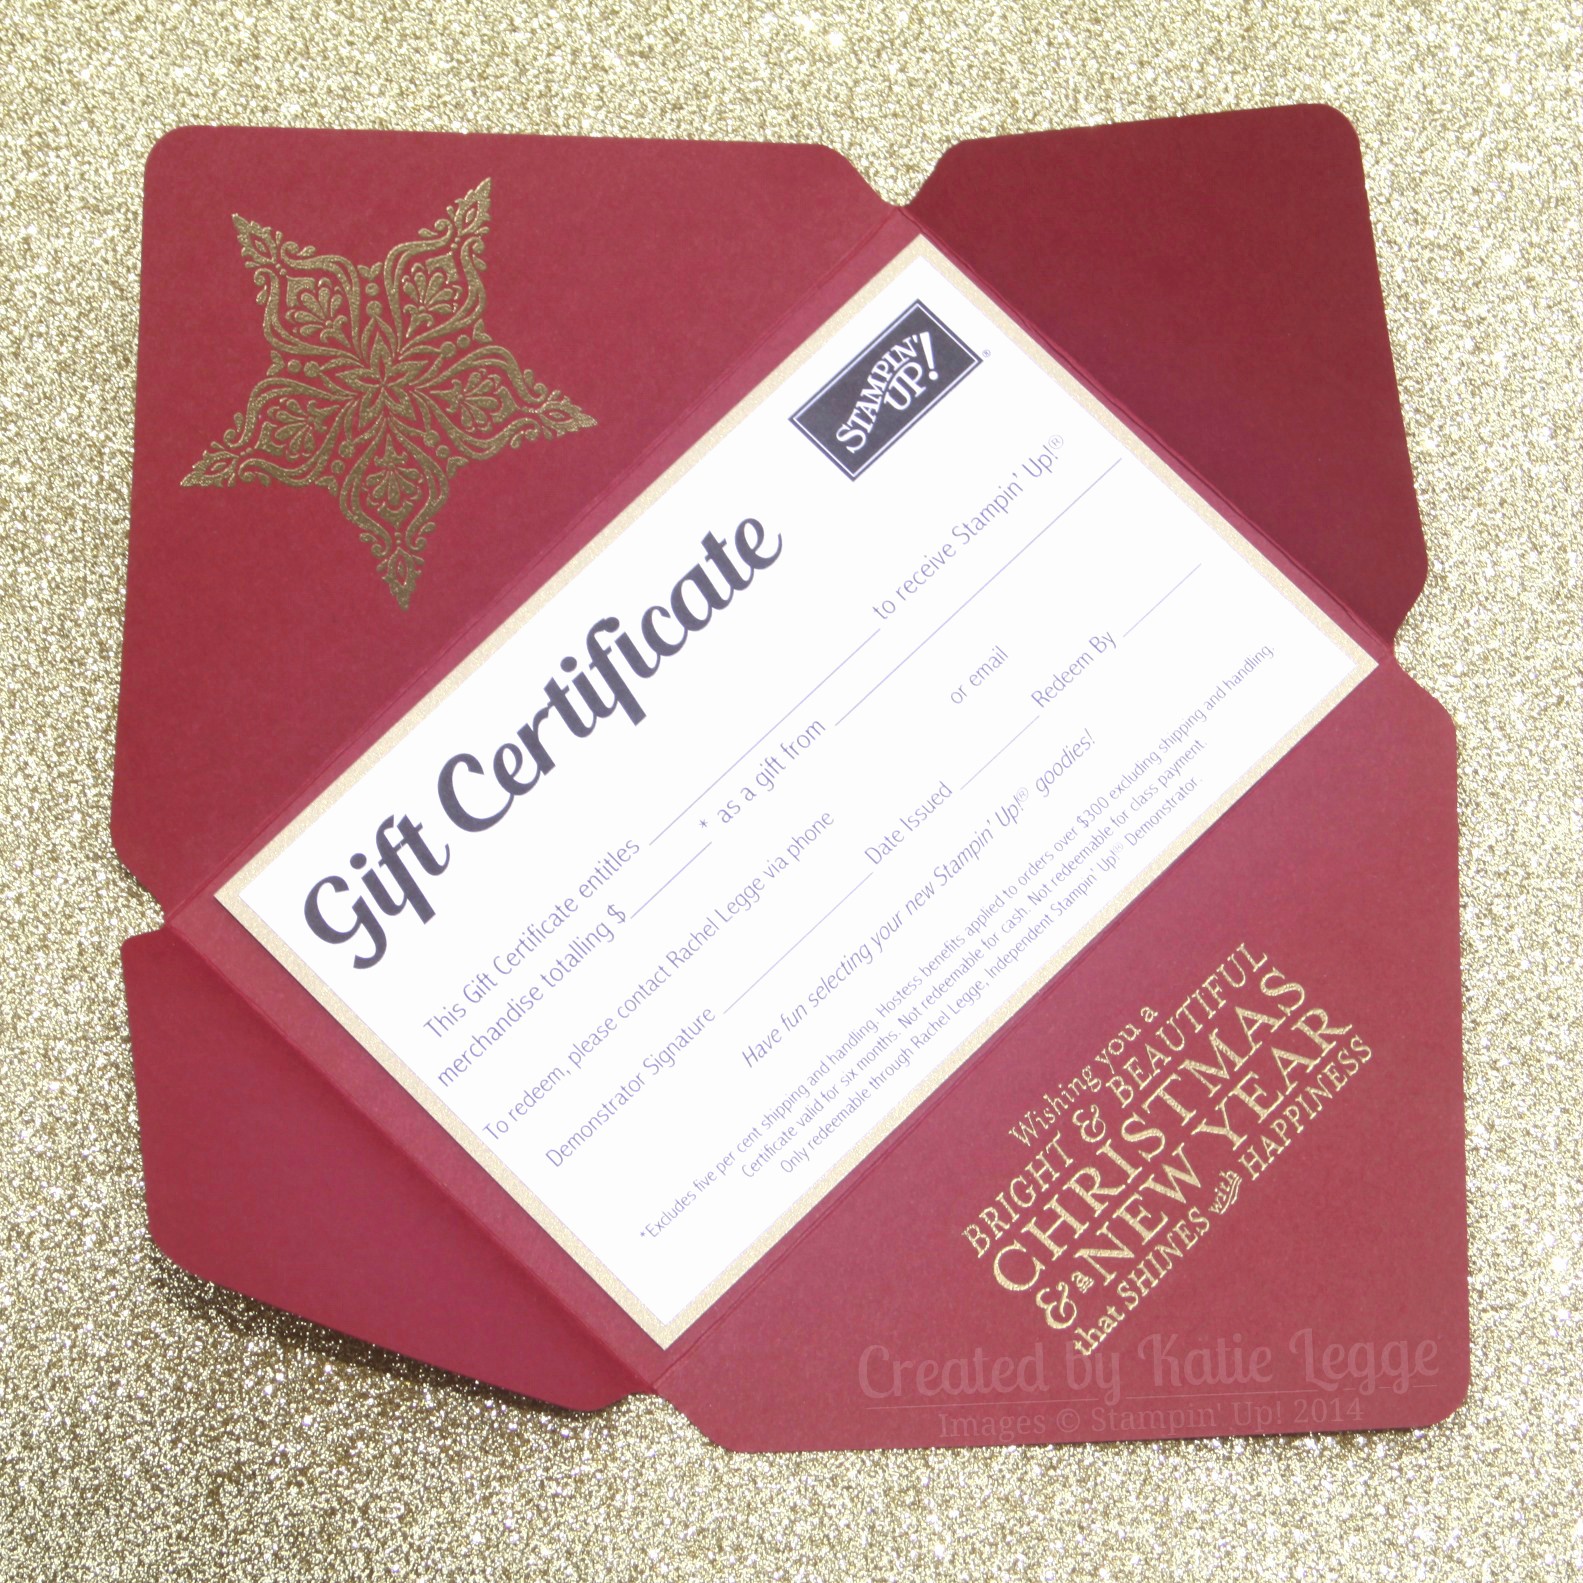 How to Make Gift Certificates Luxury Gift Certificates now Available